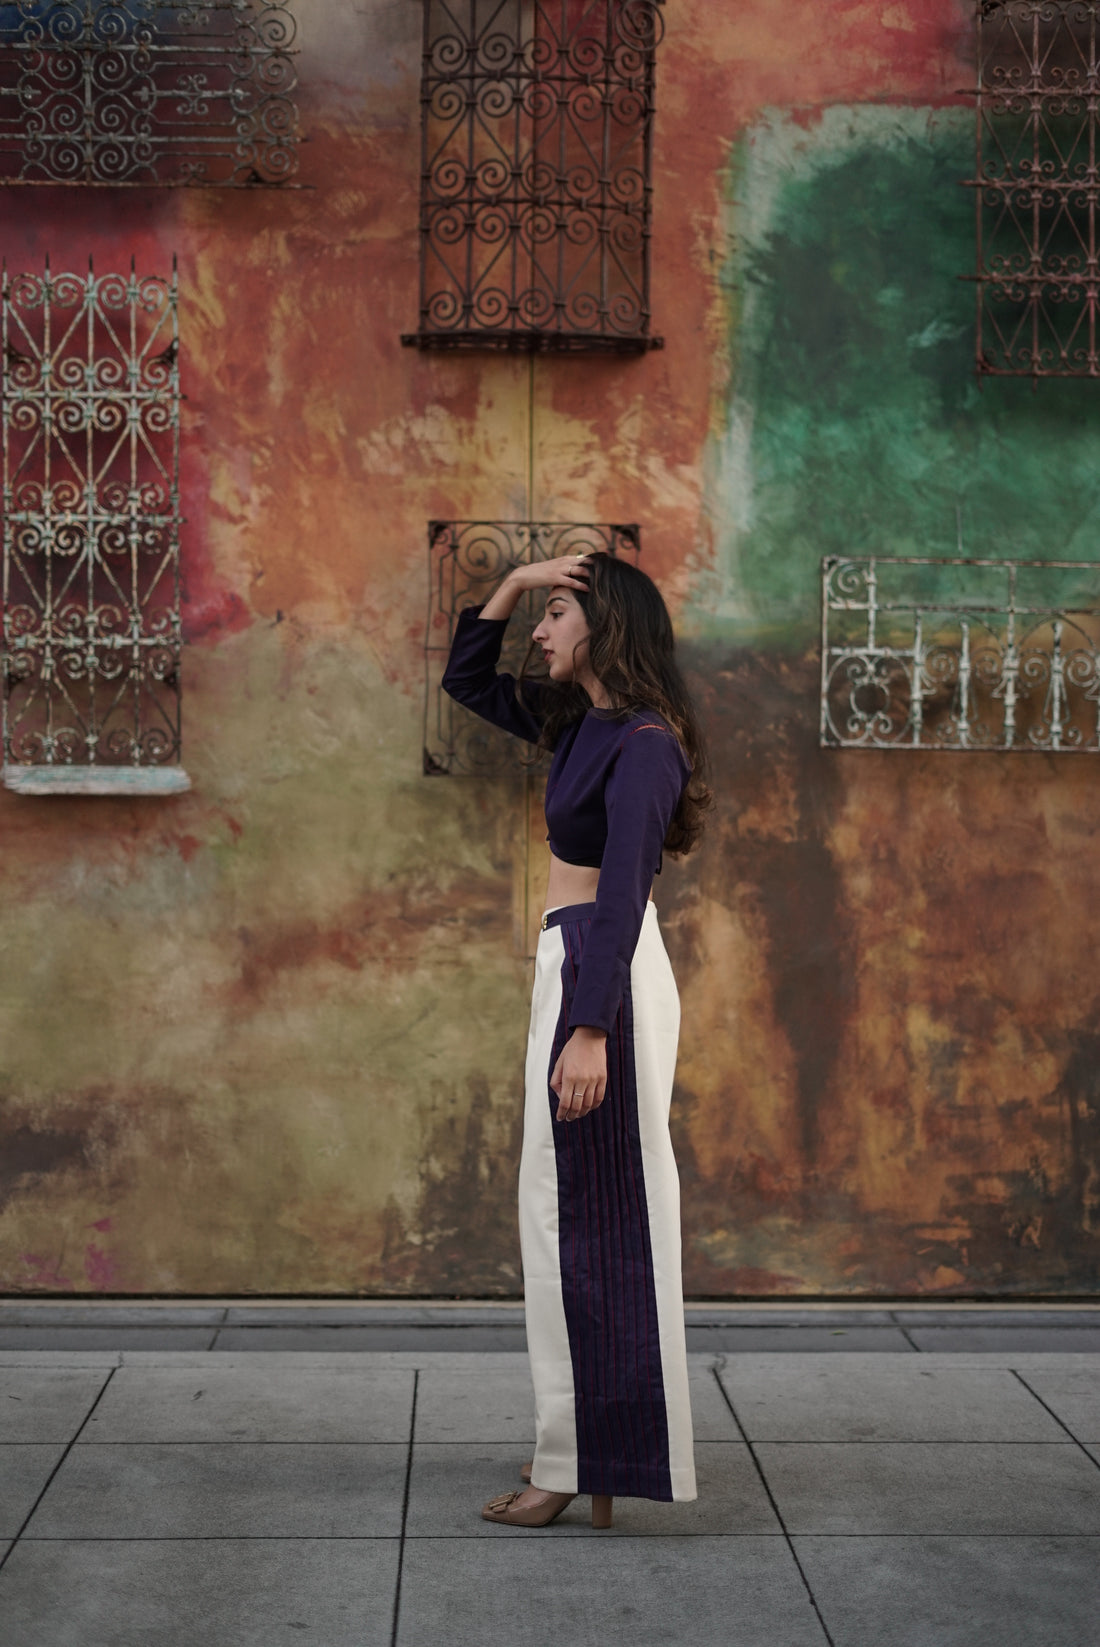 Aditi Mayer wearing a dress and heels in front of a colourful outdoor wall